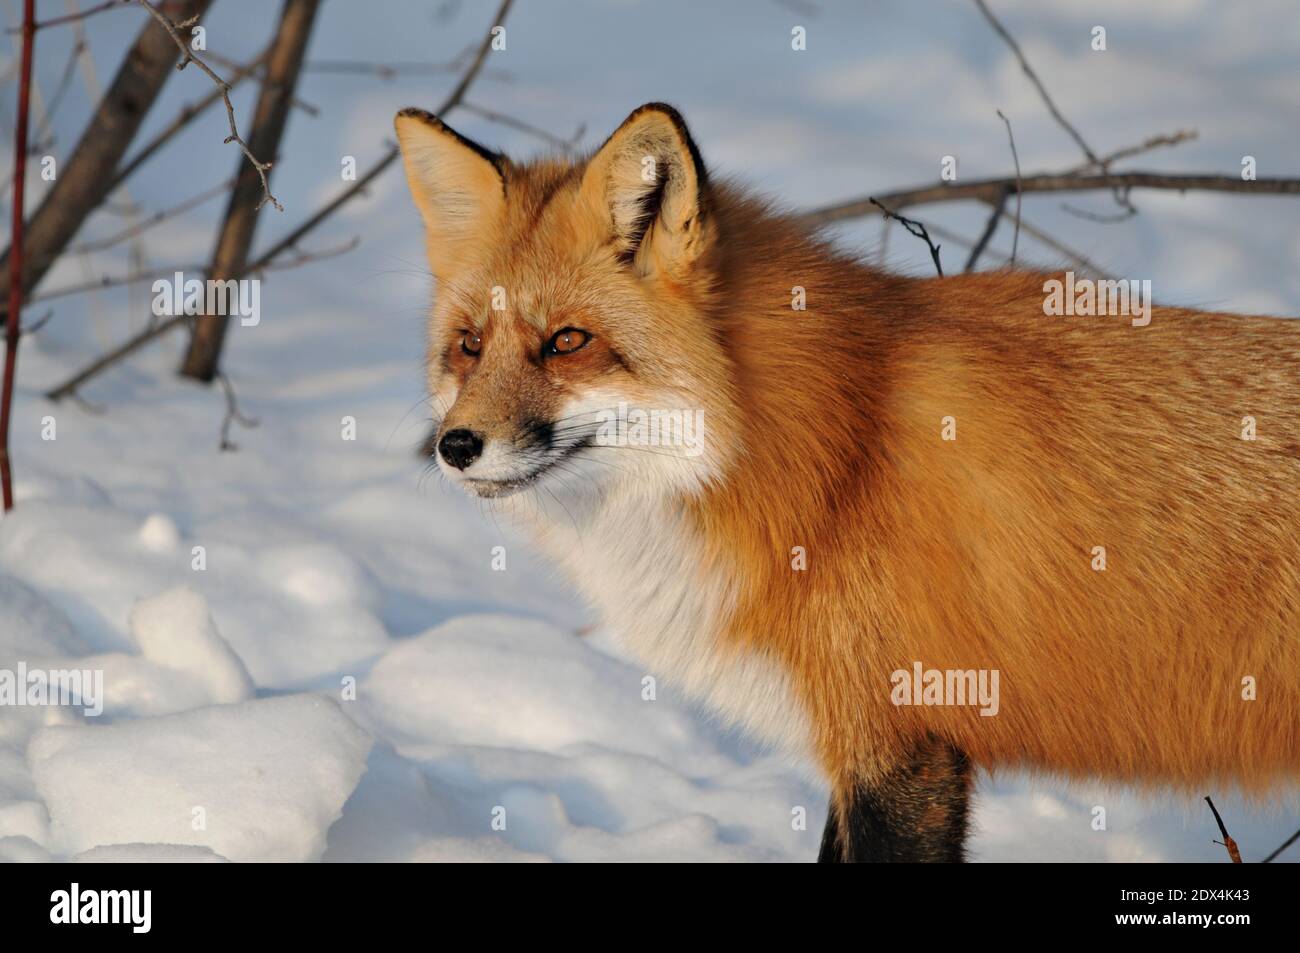 Red fox head shot close-up profile view looking to the left side in the winter season in its environment and habitat with snow background. Stock Photo